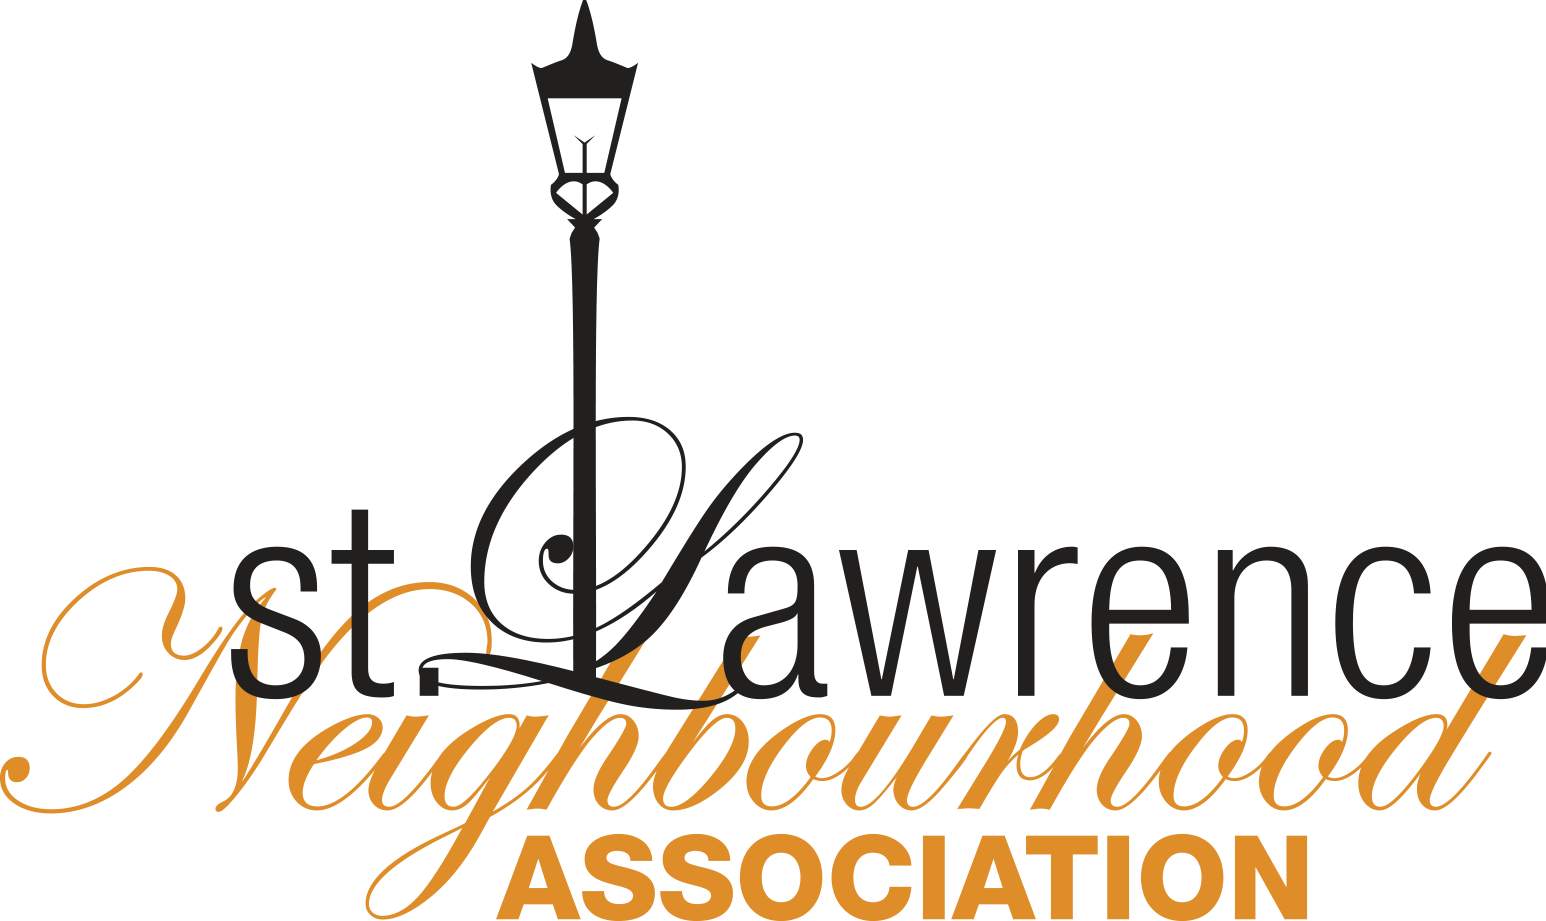 The logo for the St. Lawrence Neighbourhood Association